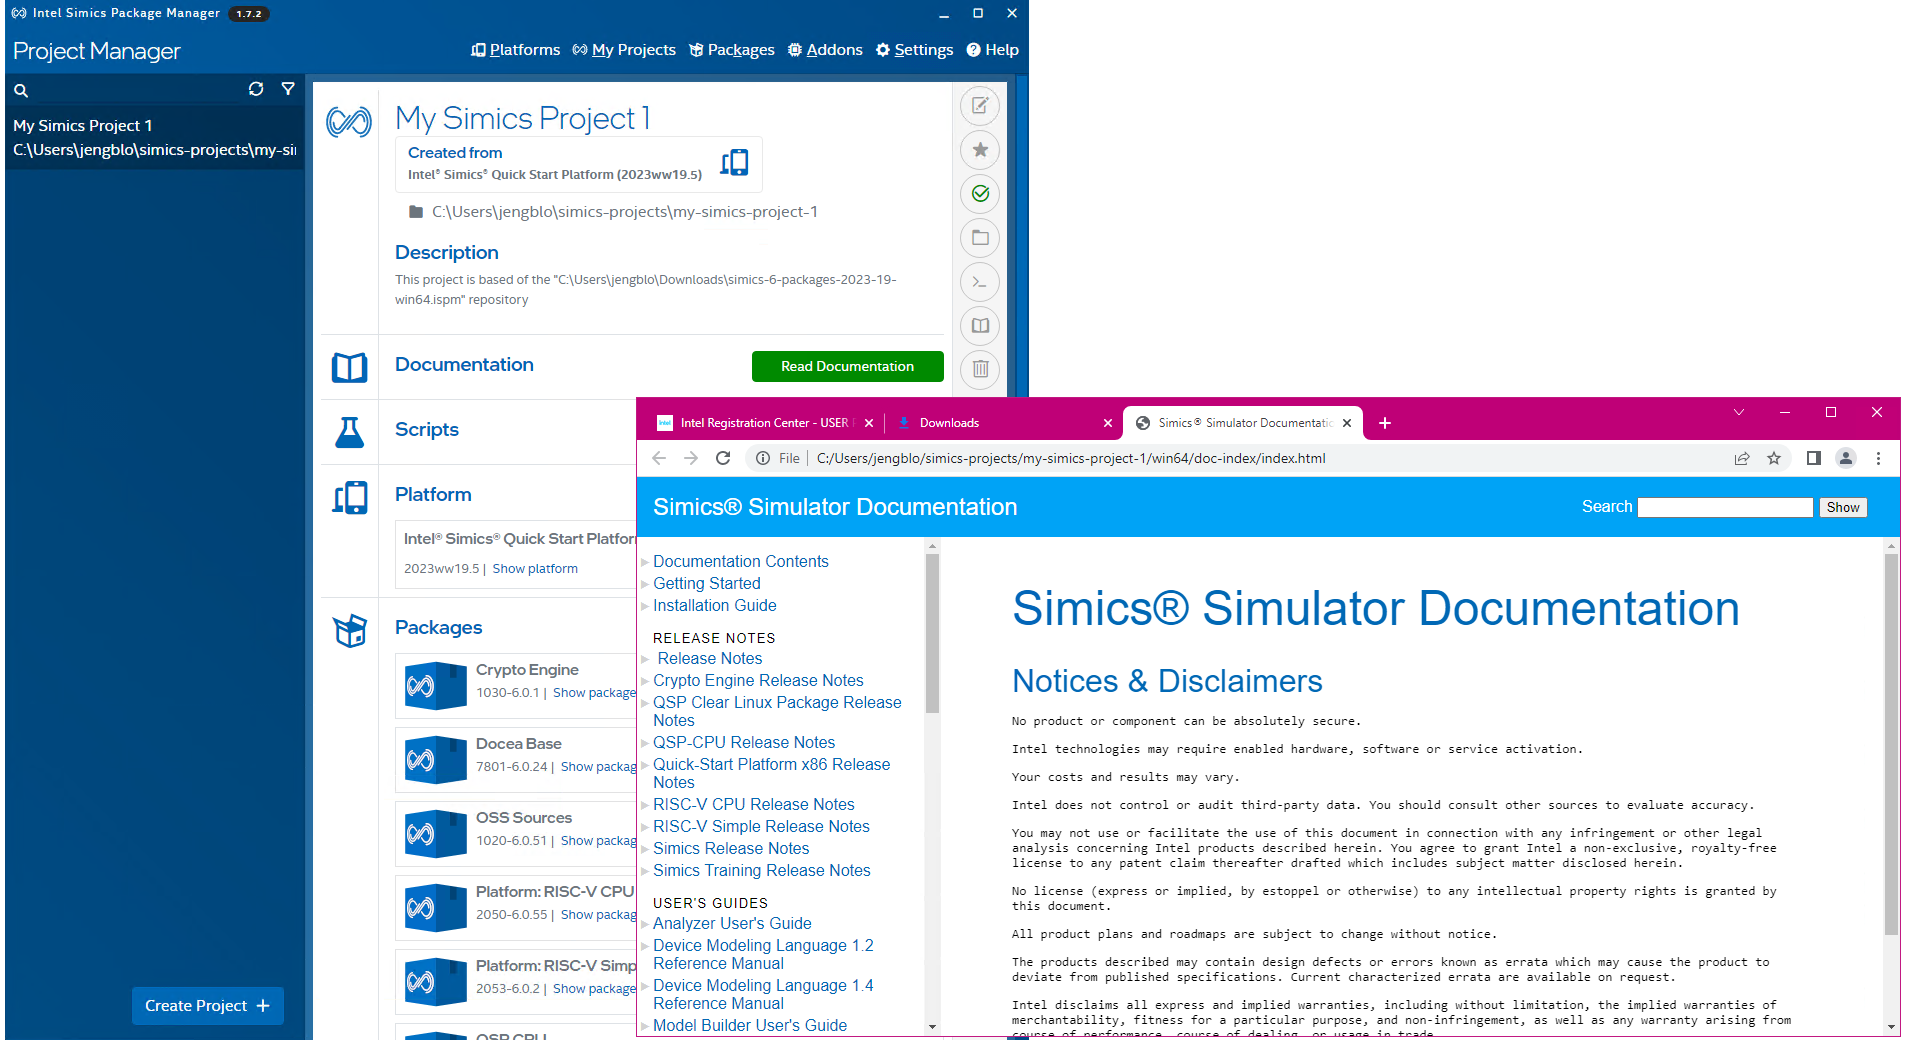 This image shows the Intel Simics simulator documentation in a web browser, with the Intel Simics Package Manager in the background